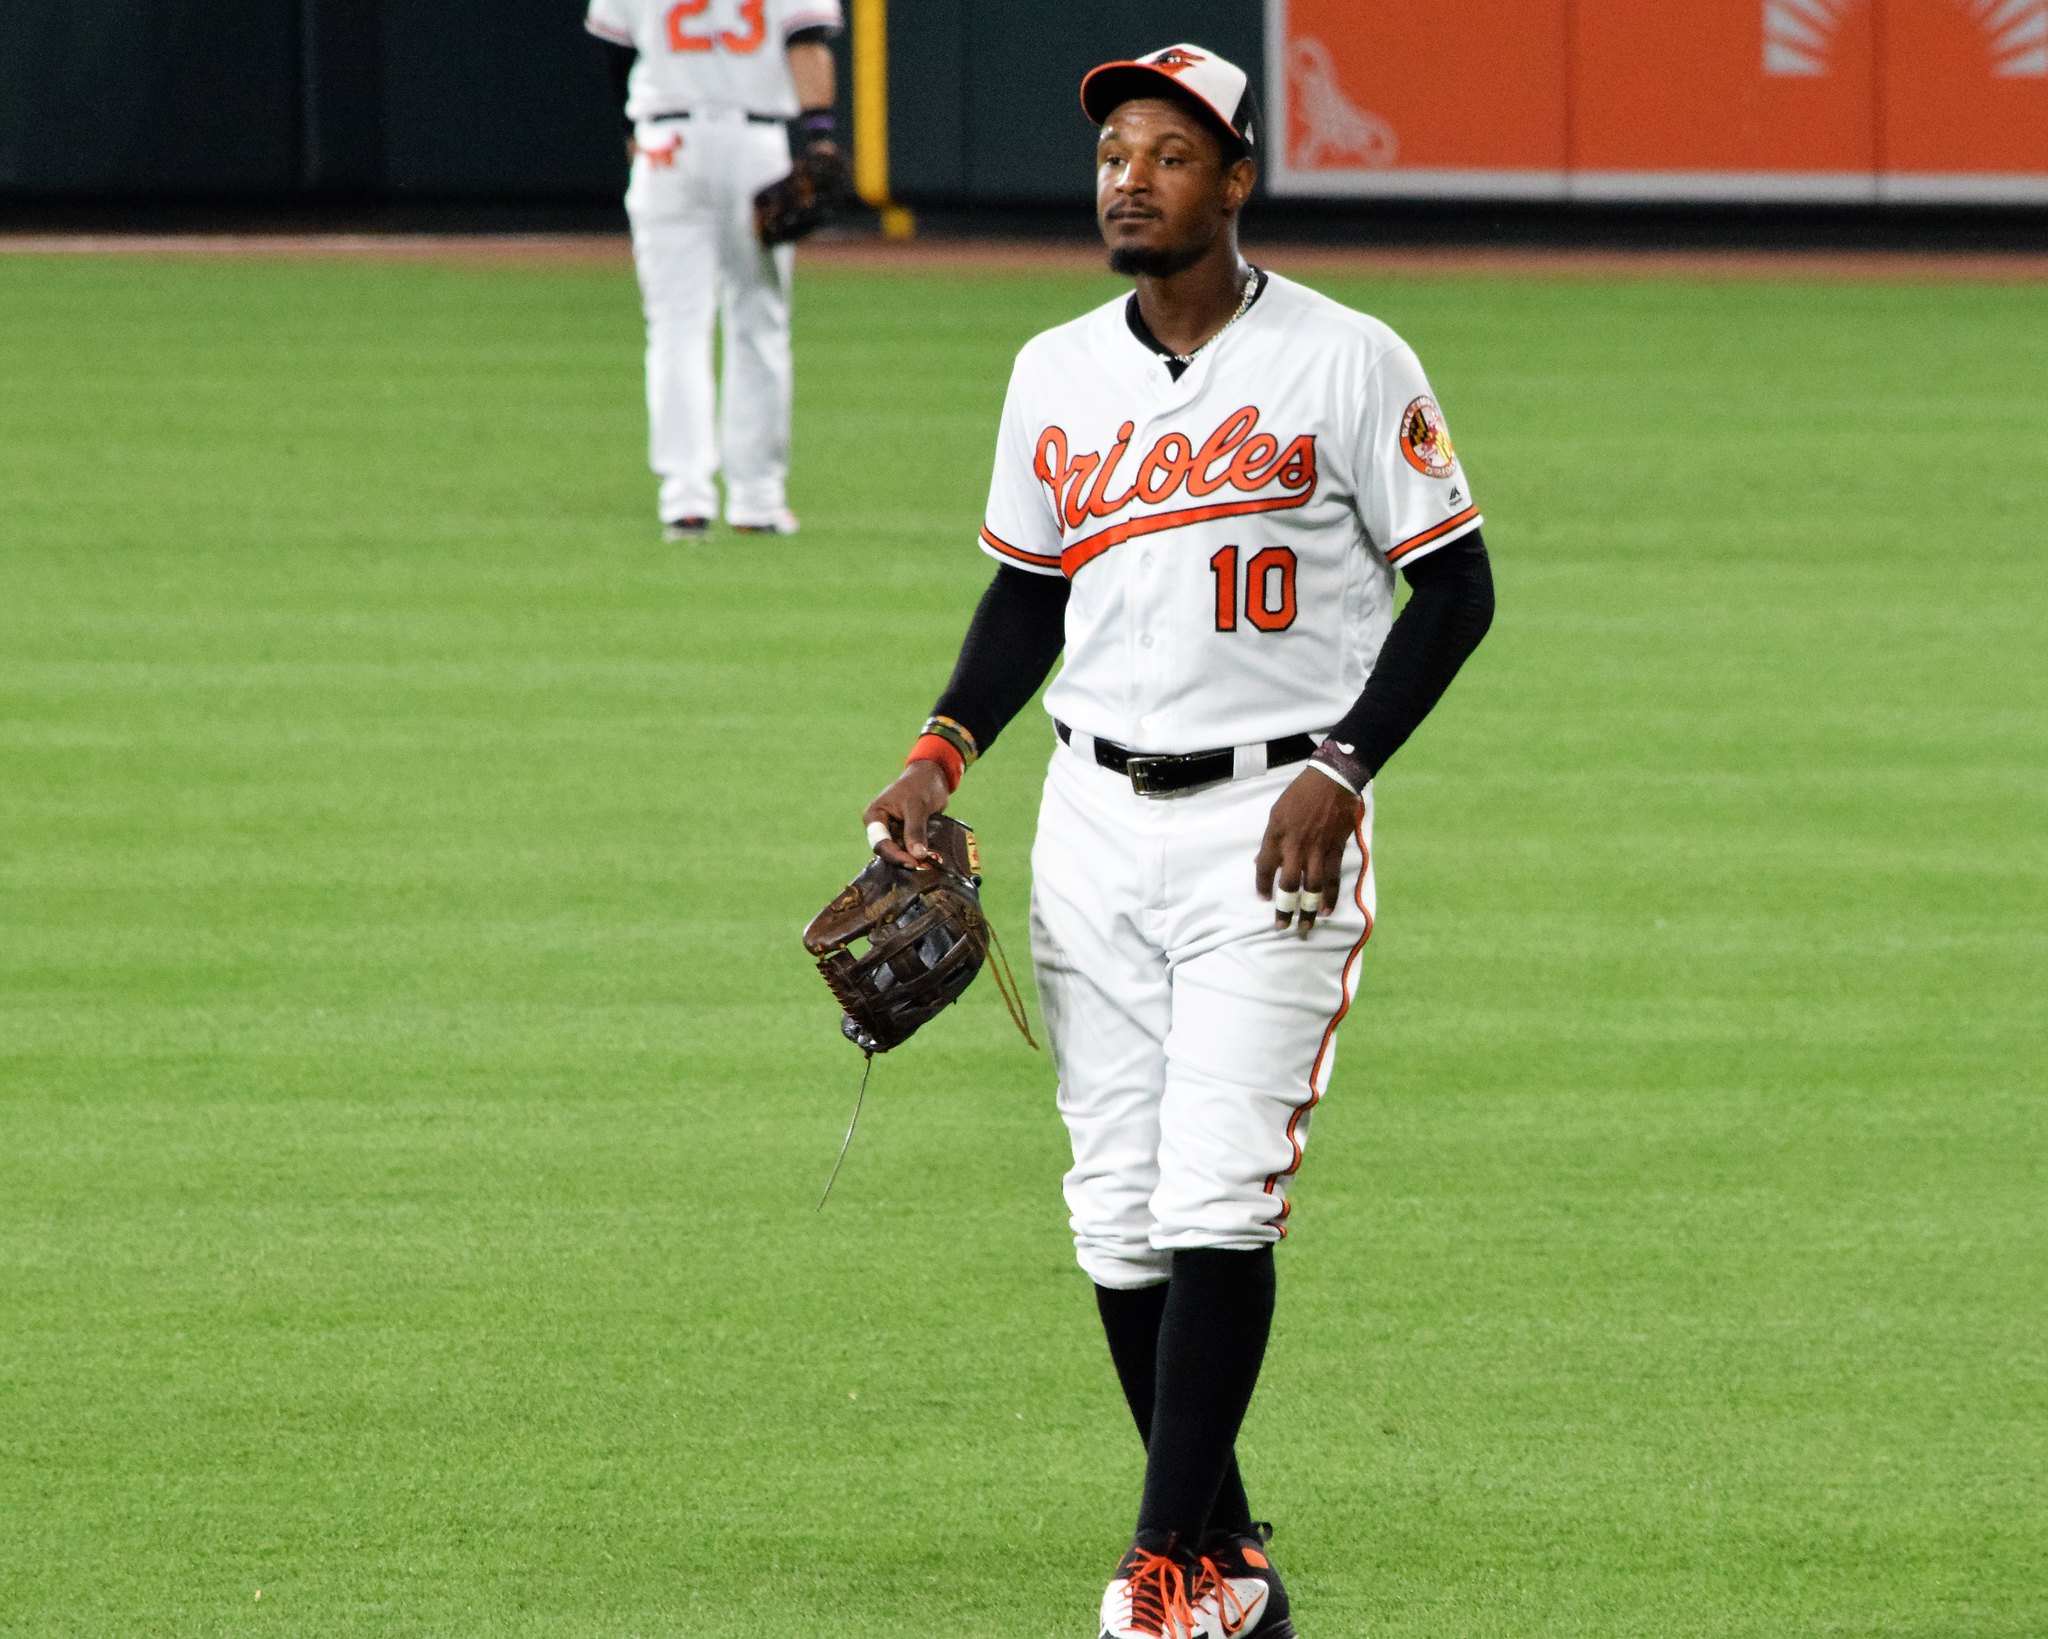 Orioles Send Five Players to All-Star Game, the Most Since 1972